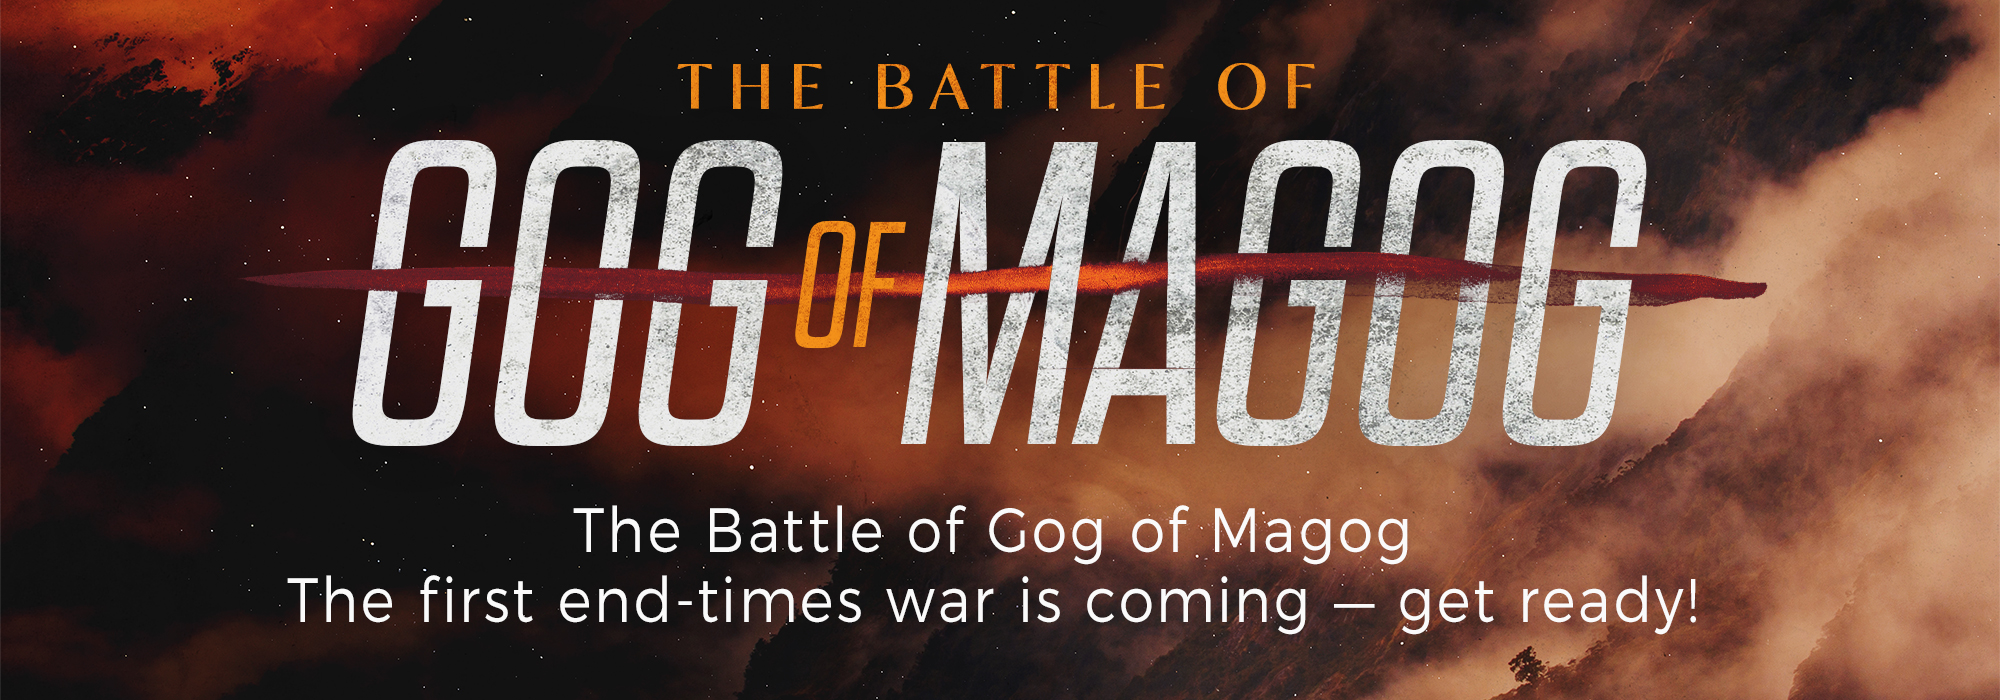 The Battle of Gog of Magog The Battle of Gog of Magog The first end-times war is coming - get ready!